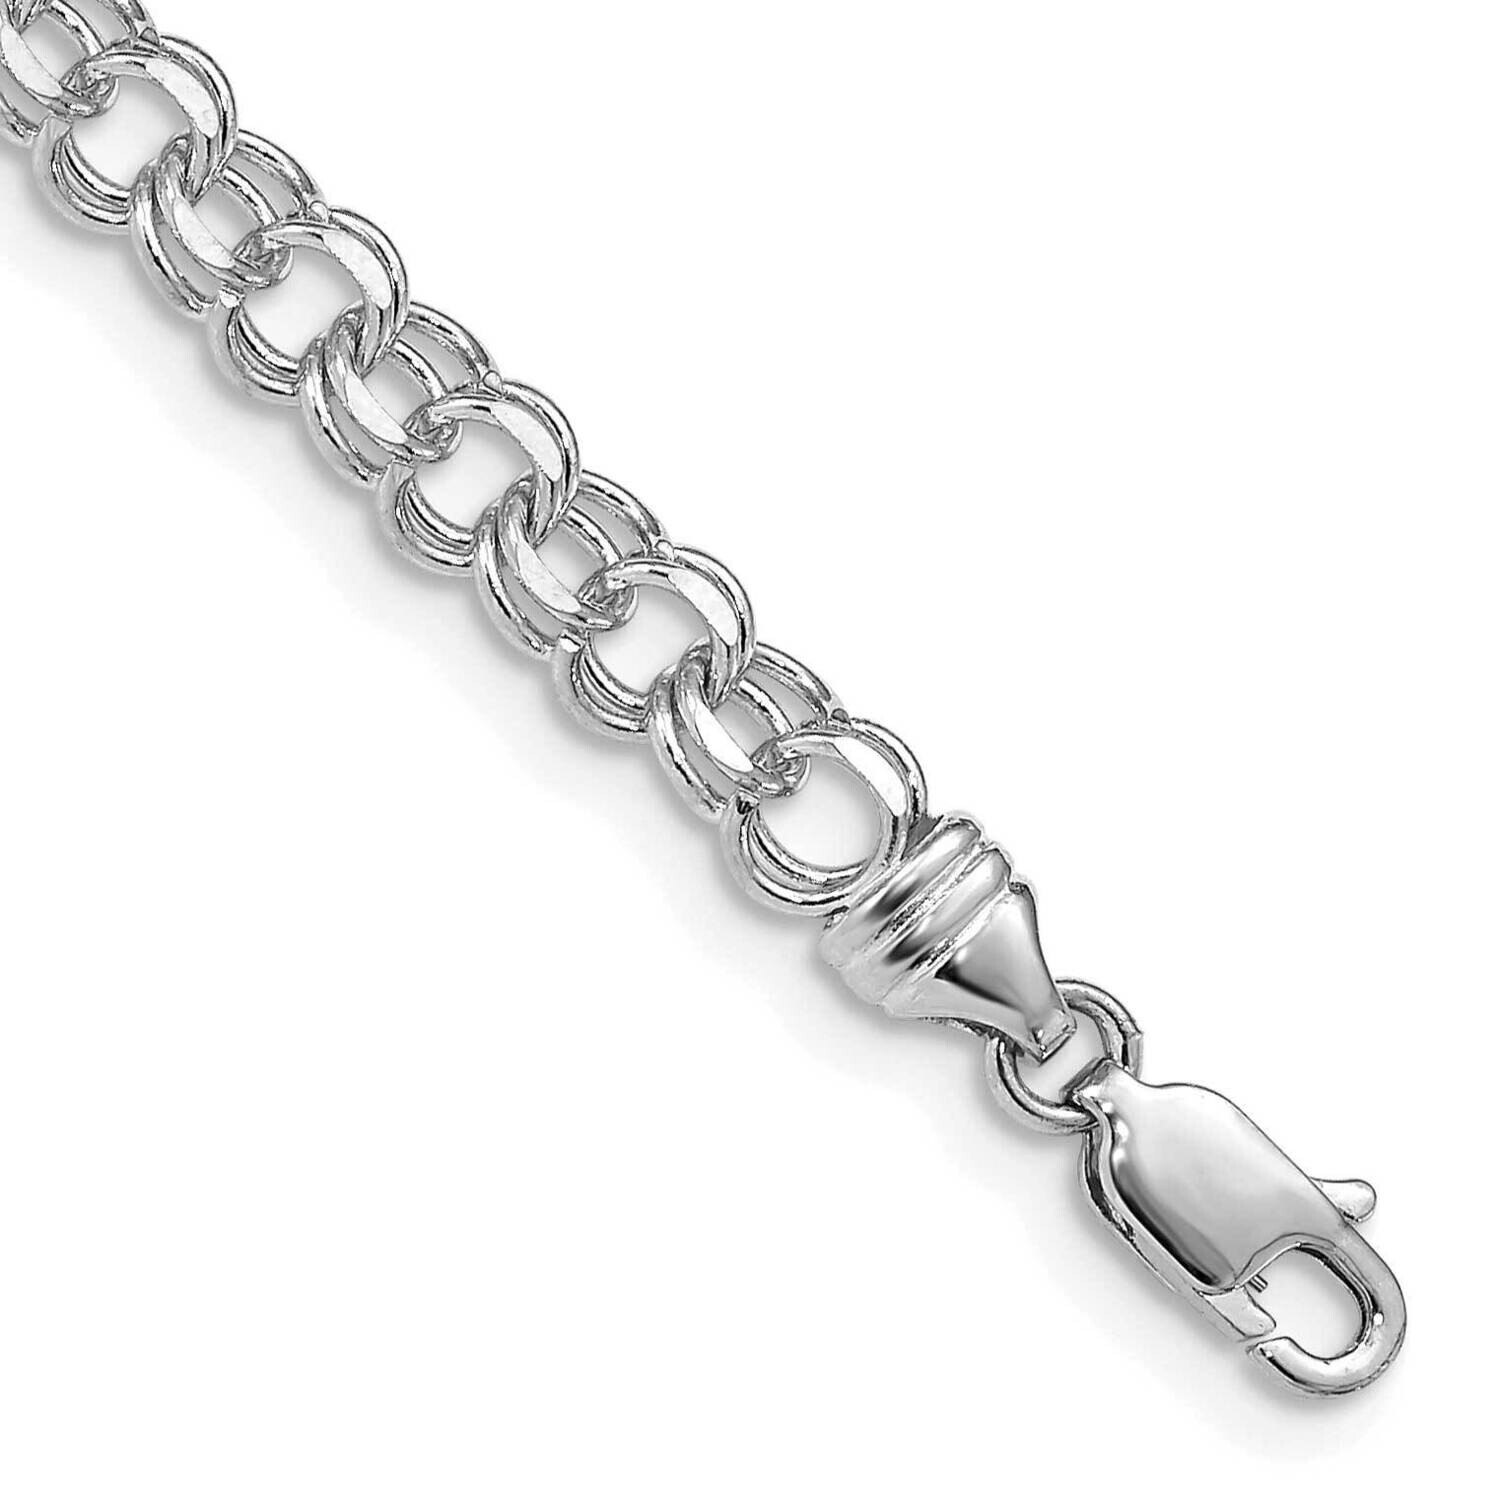 7 Inch 4.75mm Solid Double Link Charm Bracelet 14k White Gold DOH16W-7